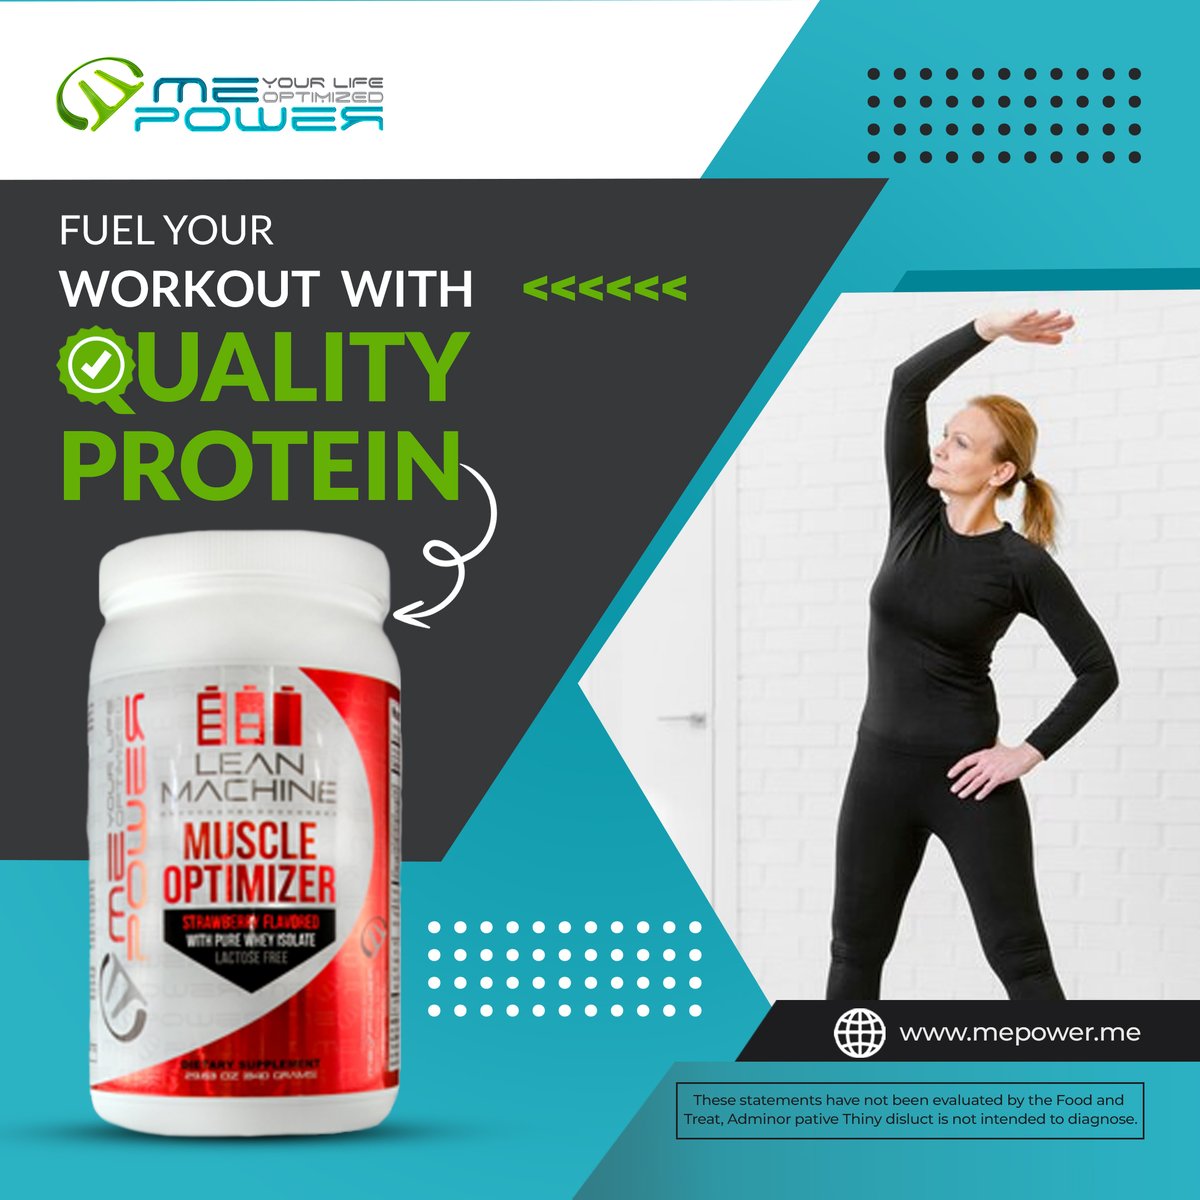 Get the most out of your workouts by eating premium protein. Awaiting you is your ultimate fitness destination!.
.
.
.
.
.
.
#products #proteinproducts #proteinpower #proteina #healthy #healthyliving #fitness #fitnesscoach #fitnessmotivation #fitnessaddict #fitnessjourney